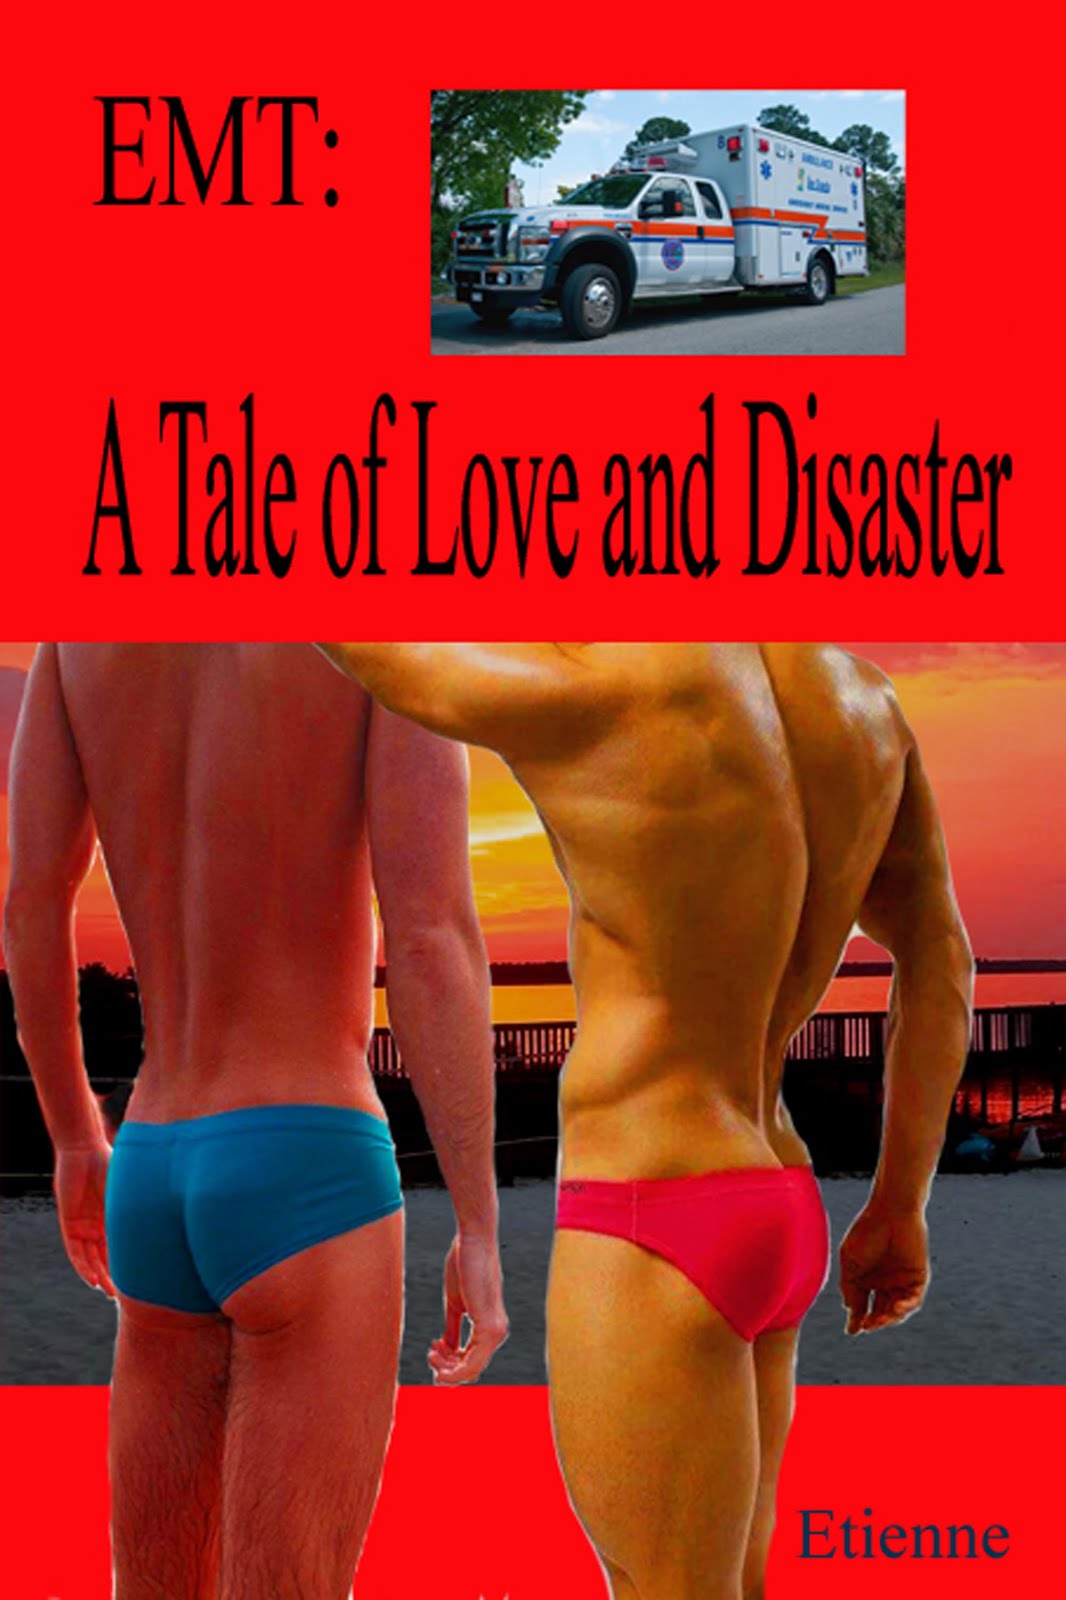 EMT: A Tale of Love and Disaster